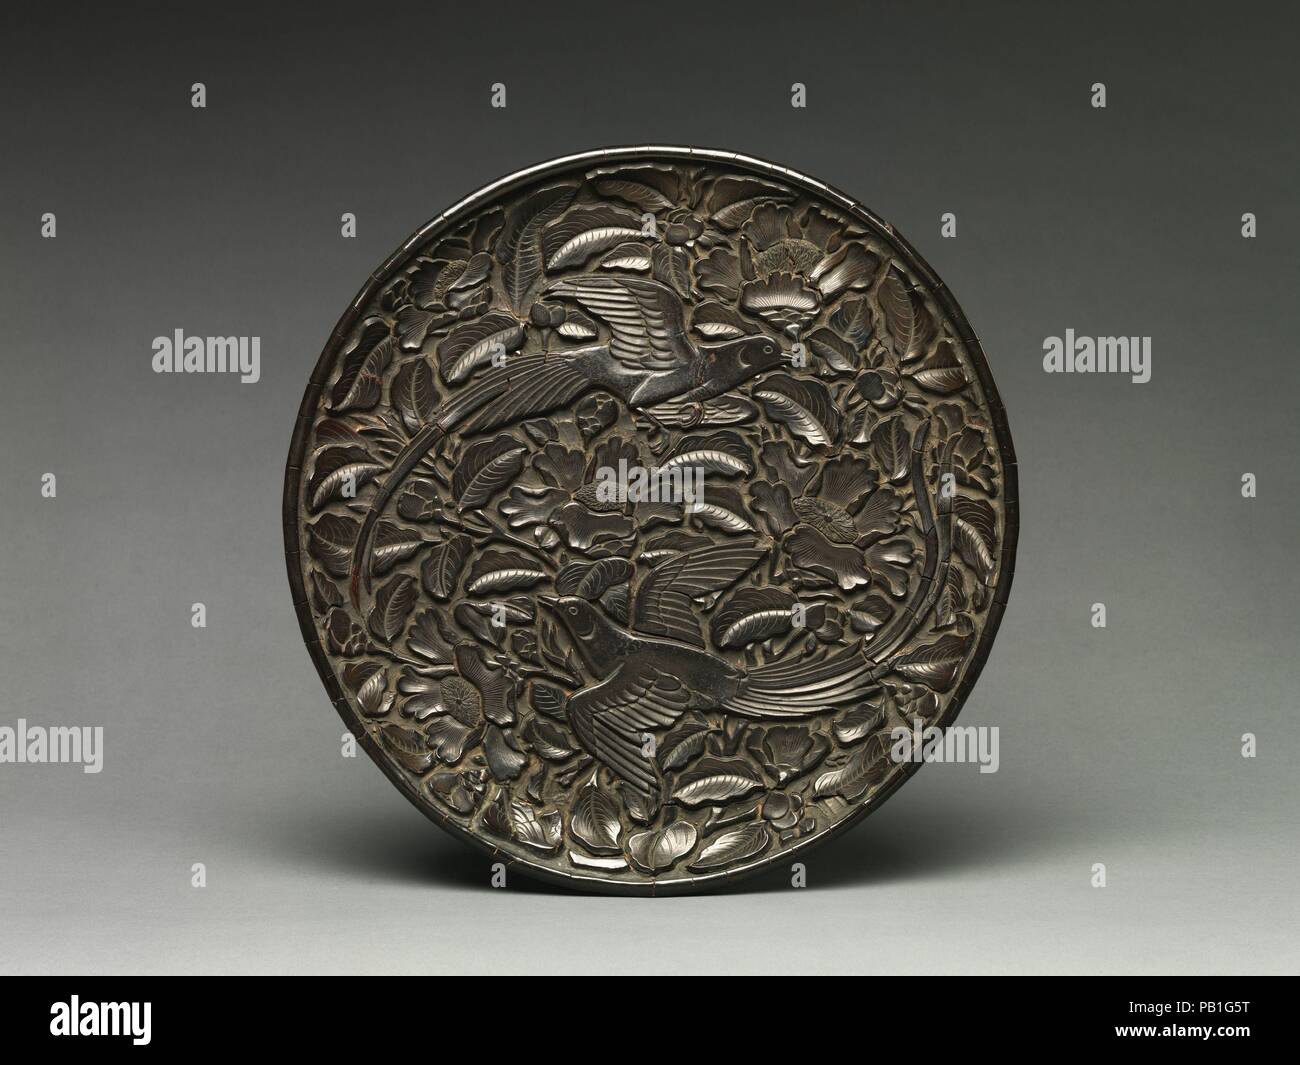 Round dish with long-tailed birds and flowers. Culture: China. Dimensions: H. 1 7/16 in. (3.7 cm); Diam. 12 3/8 in. (31.4 cm). Date: second half of the 14th century.  A sophisticated example of the two-bird design, the compact composition of this dish features flowers and long-tailed birds (shoudai, or paradise flycatchers)--a symbol of a rewarding career and long life--carved in a three-dimensional effect. Museum: Metropolitan Museum of Art, New York, USA. Stock Photo